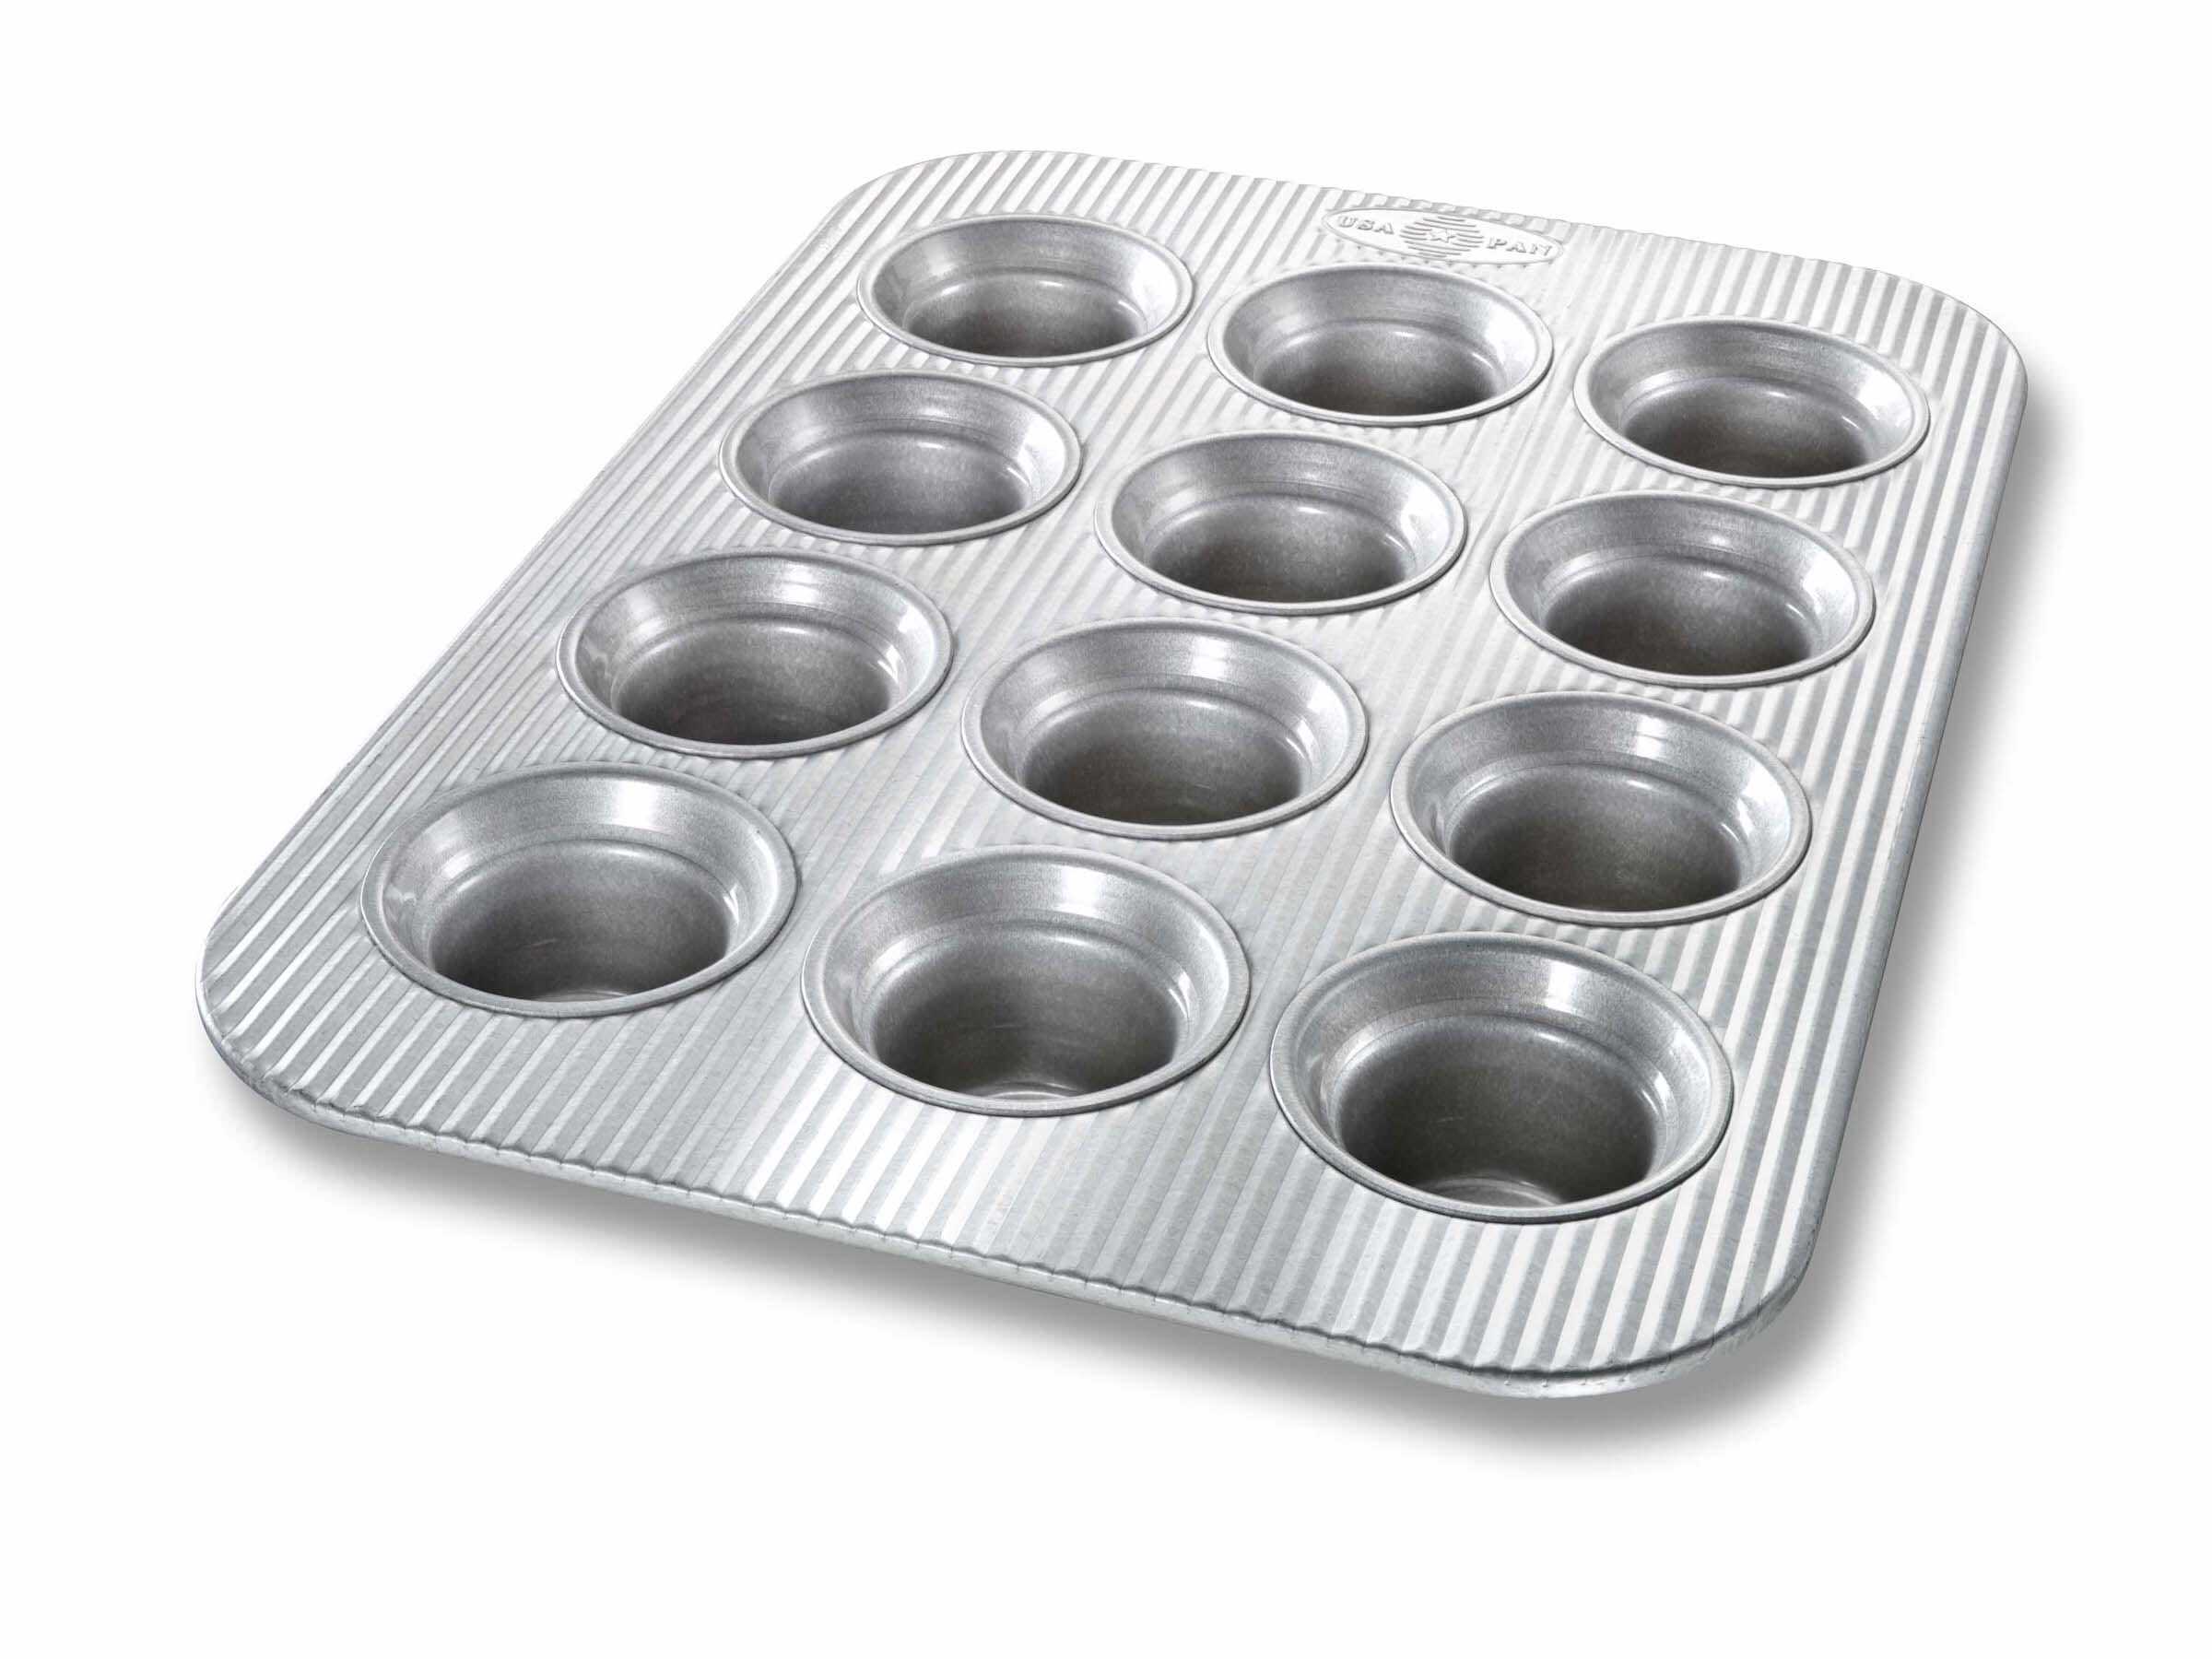 USA Pan Bakeware Toaster Oven Cupcake and Muffin Pan, Nonstick Quick  Release Coating, 11 x 9 x 1 1/2, Aluminized Steel